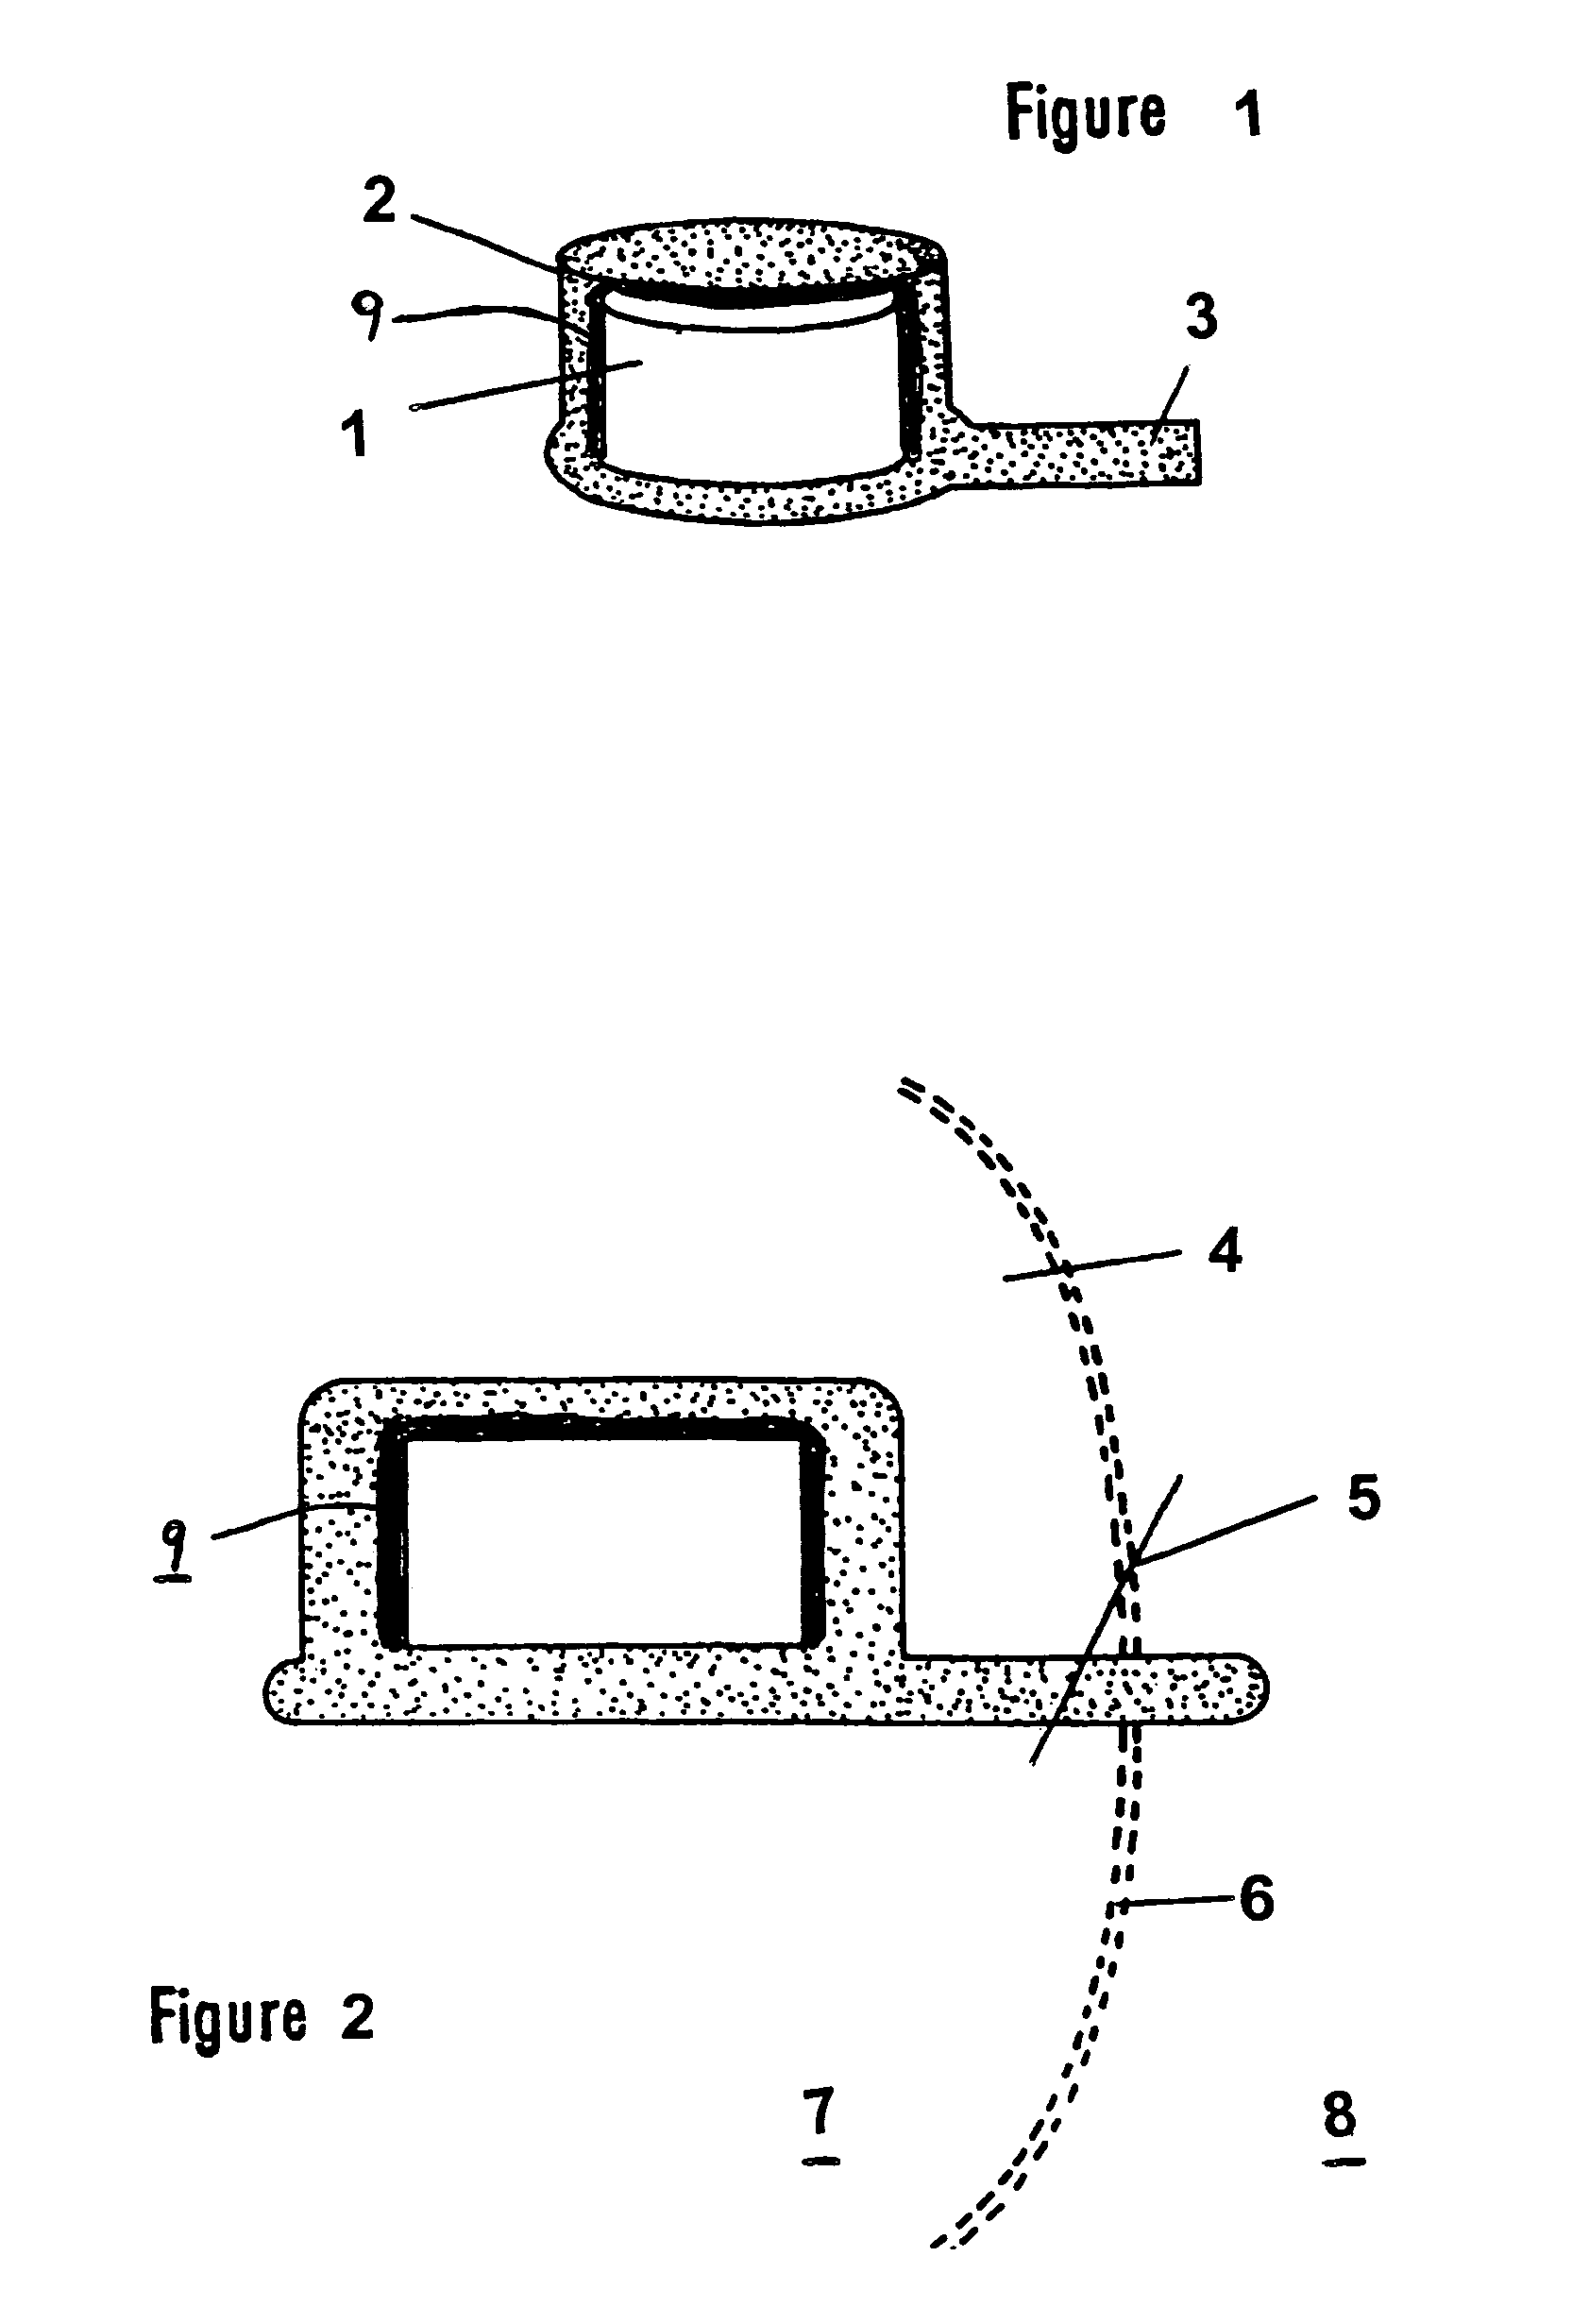 Process for the production of sustained release drug delivery devices